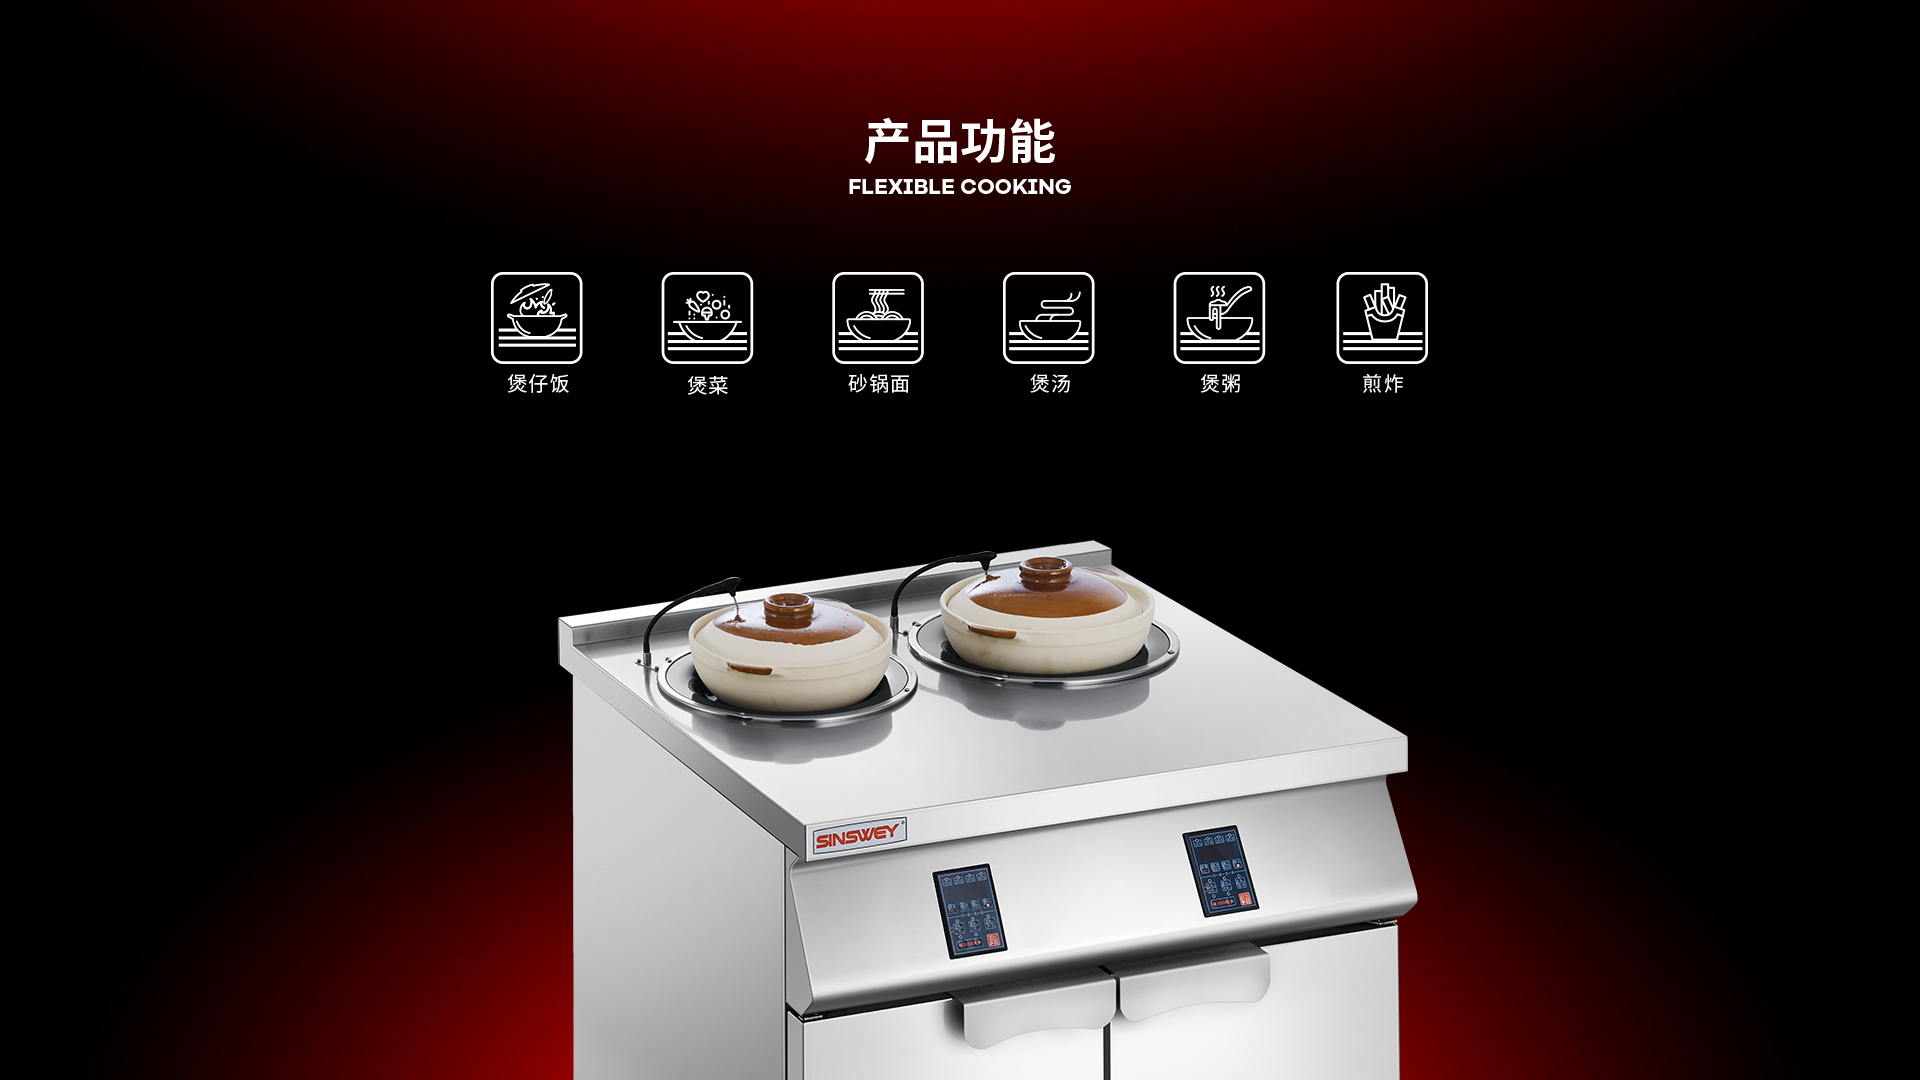 sinswey_engineering_product_large_clay_pot_stove_details_page_product_function.jpg